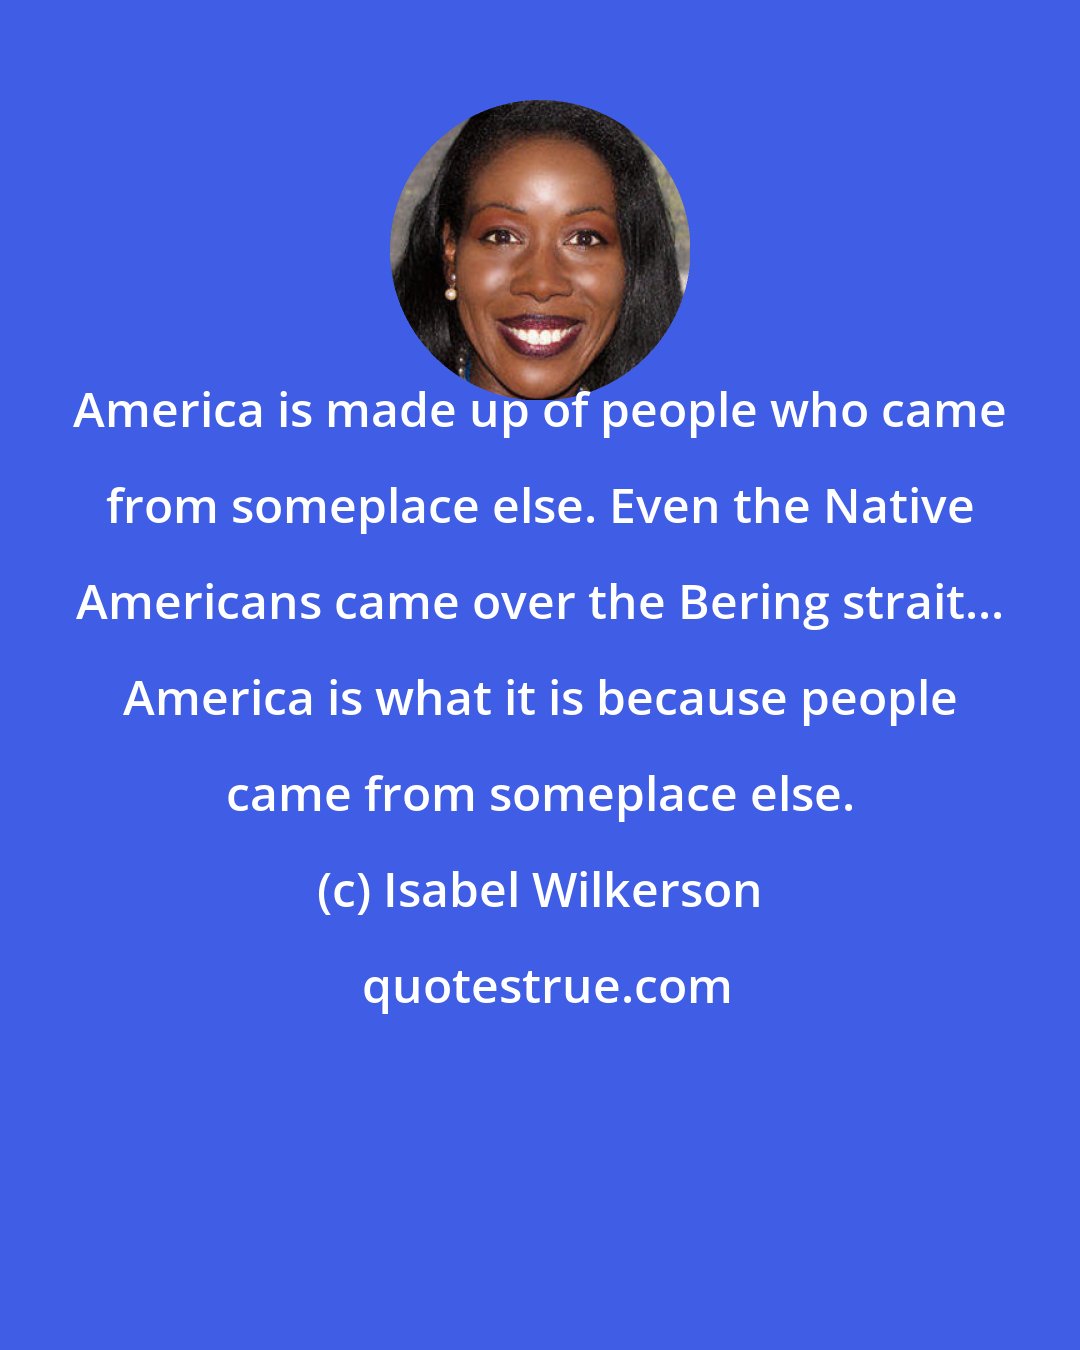 Isabel Wilkerson: America is made up of people who came from someplace else. Even the Native Americans came over the Bering strait... America is what it is because people came from someplace else.